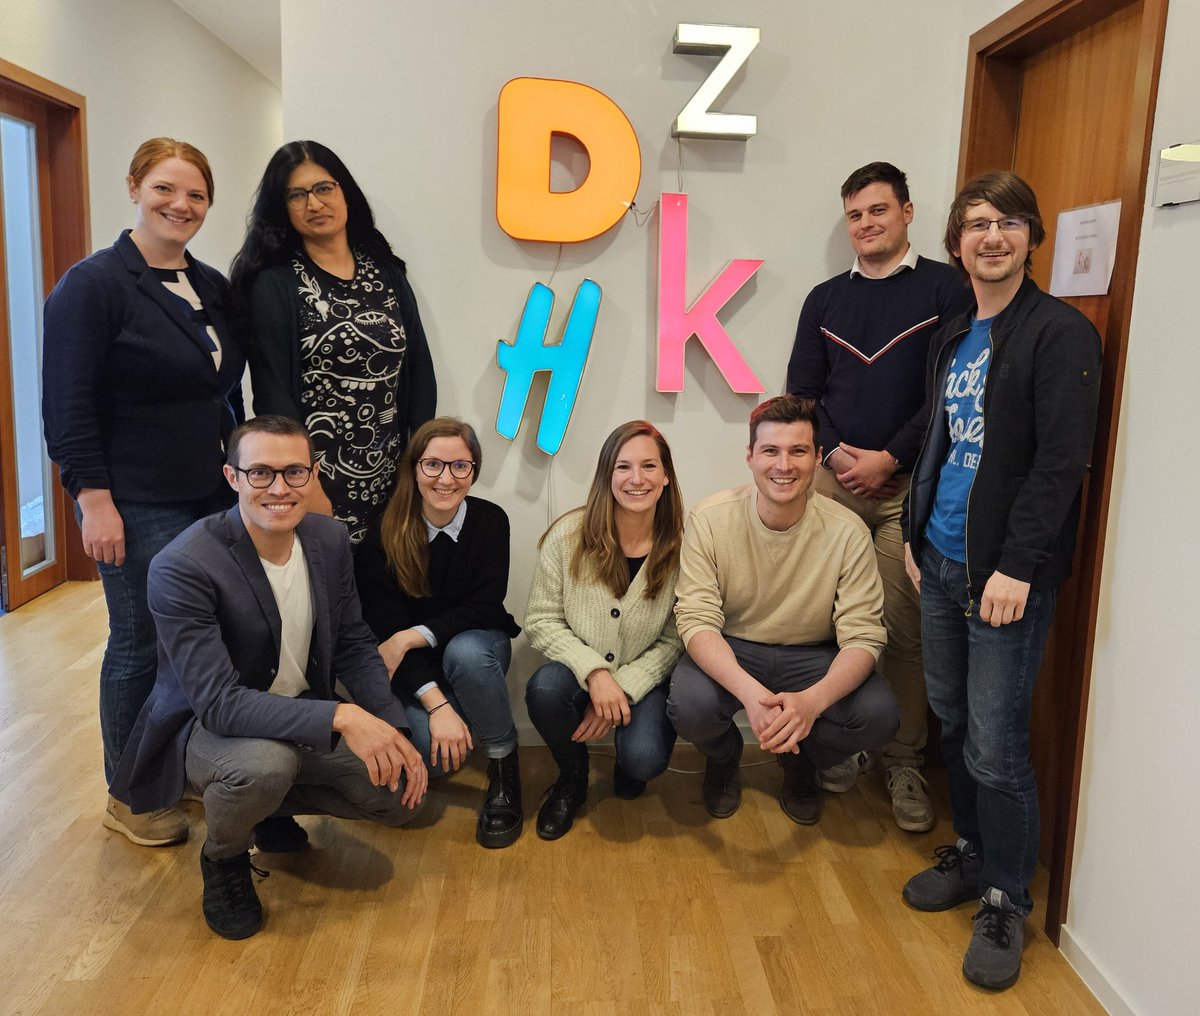 Young-DZHK committee meeting in Berlin, dicussing everything from funding guidelines to the annual young retreat taking place in frankfurt 11th-12th of september - stay tuned.. 😉 @dzhk_germany @SFG_Ffm @nicolai_leo @FlorianConst @_LauraParma @SoniaSingh0105 @MichaelMolitor6